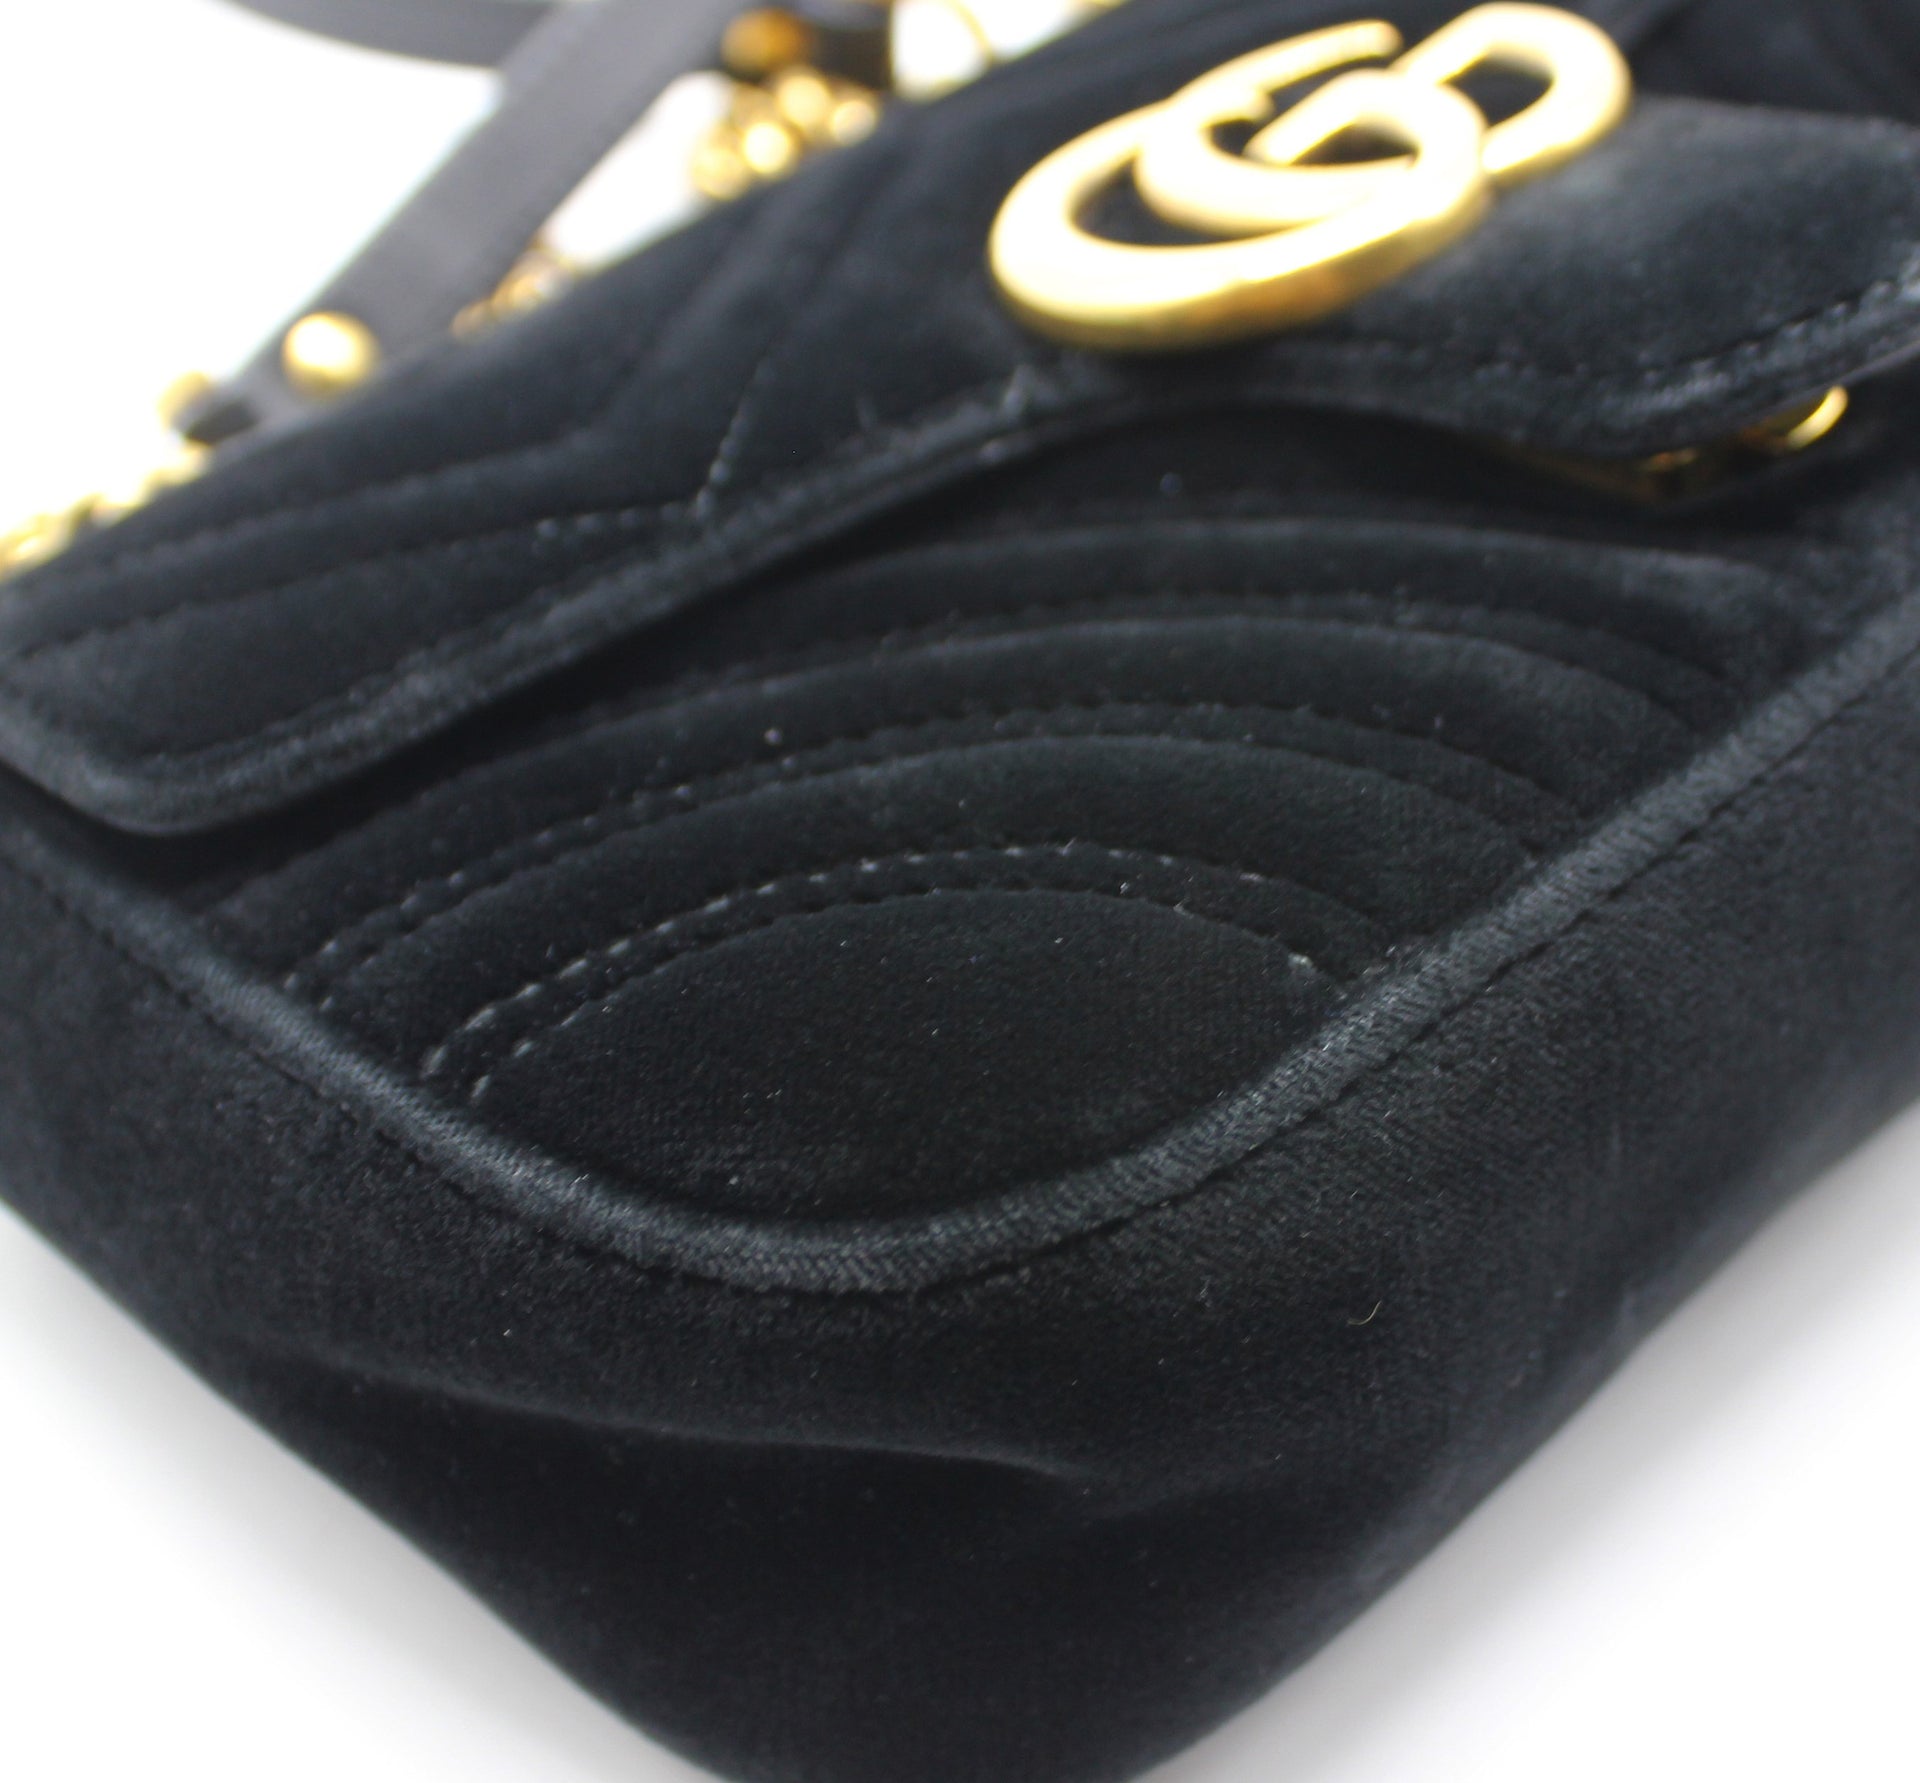 Gucci GG Marmont Small Velvet Quilted Shoulder Bag